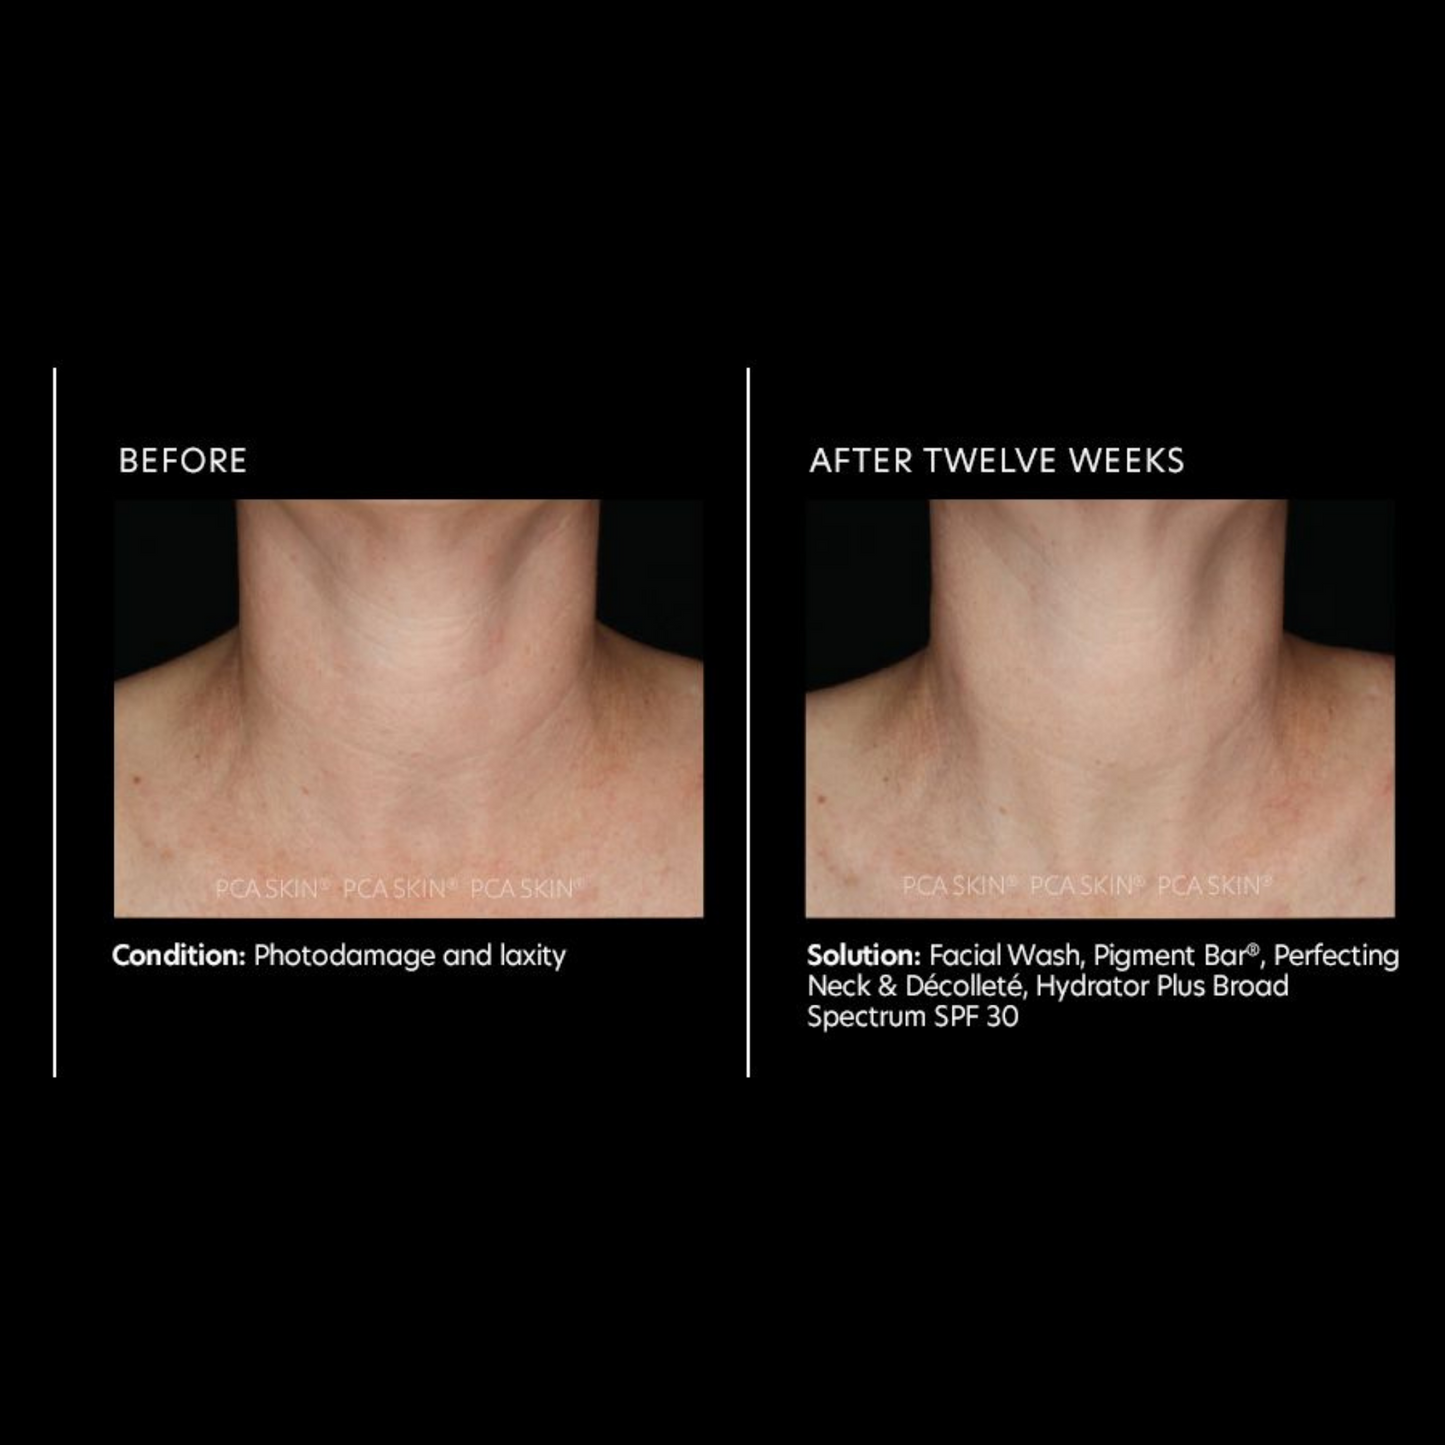 Perfecting Neck and Décolleté | PCA Skin